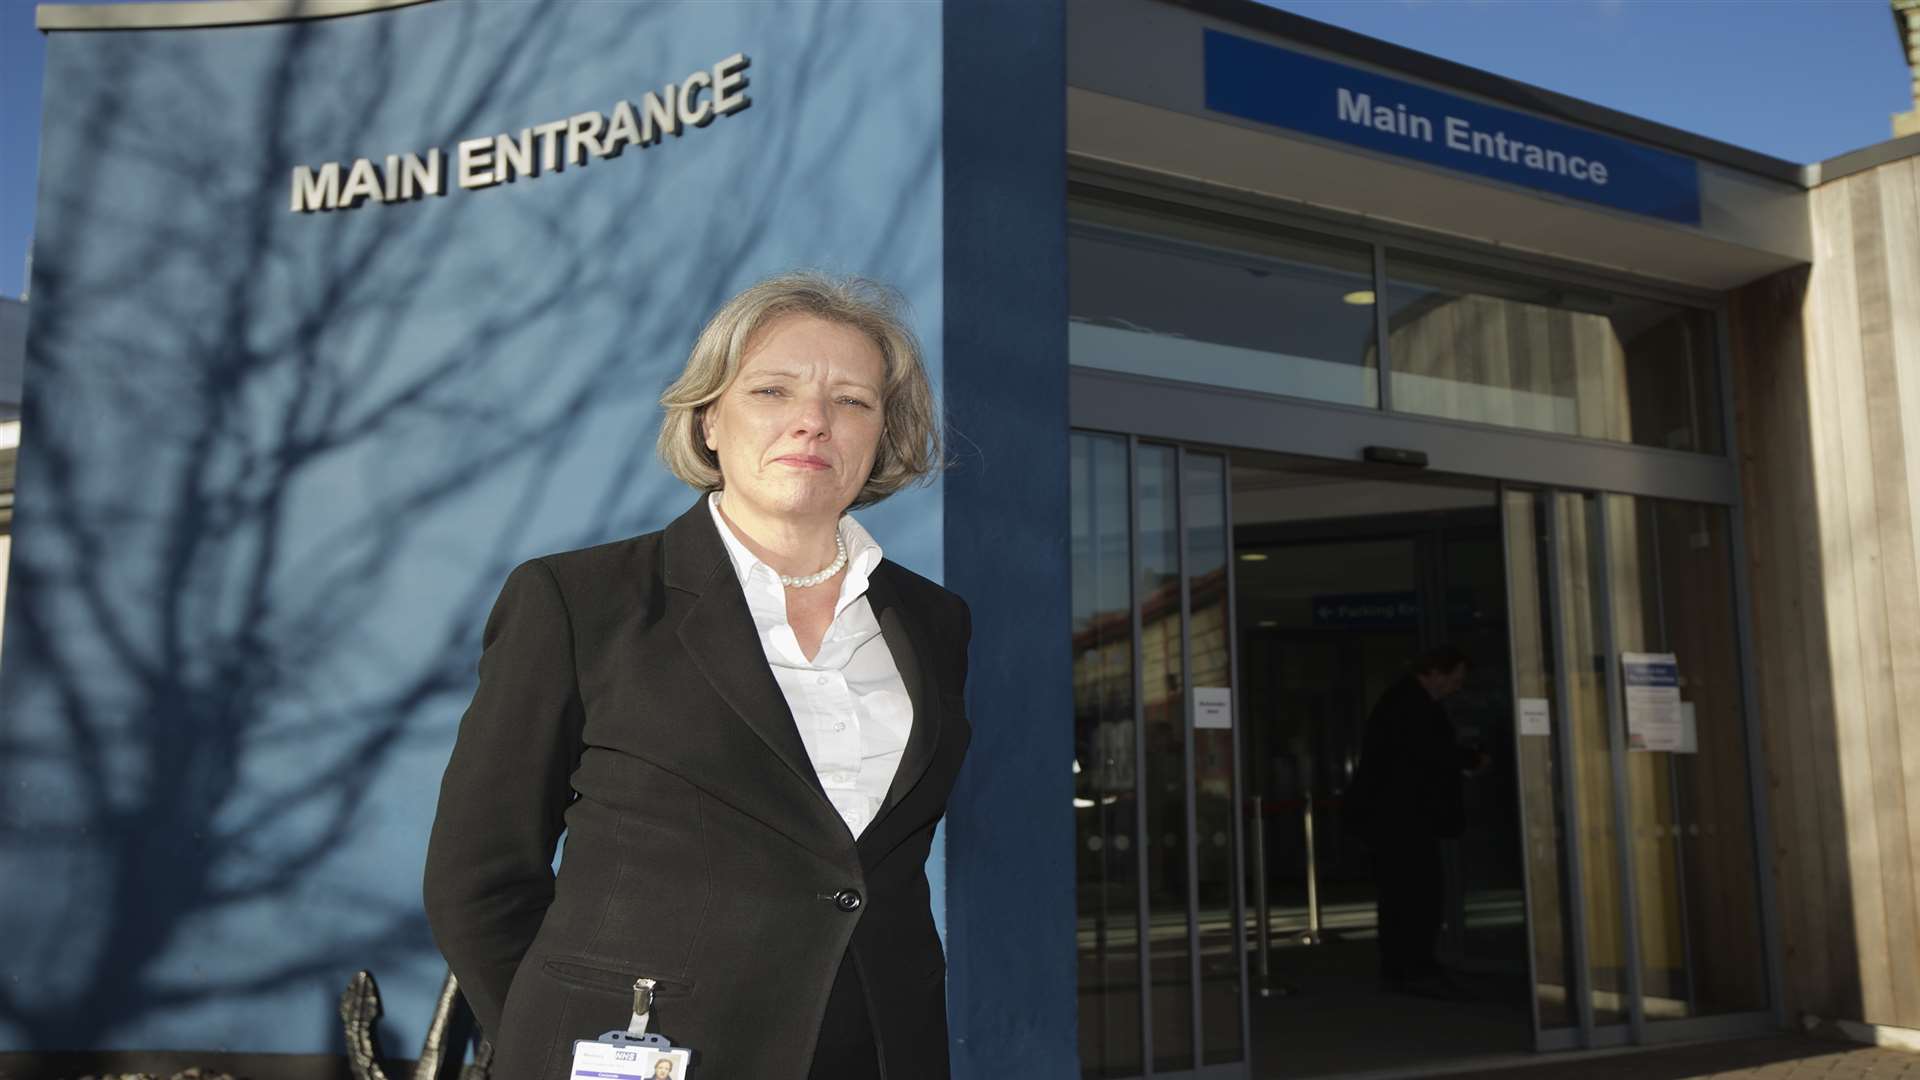 Shena Winning has stepped down as chairman of the Medway NHS Foundation Trust